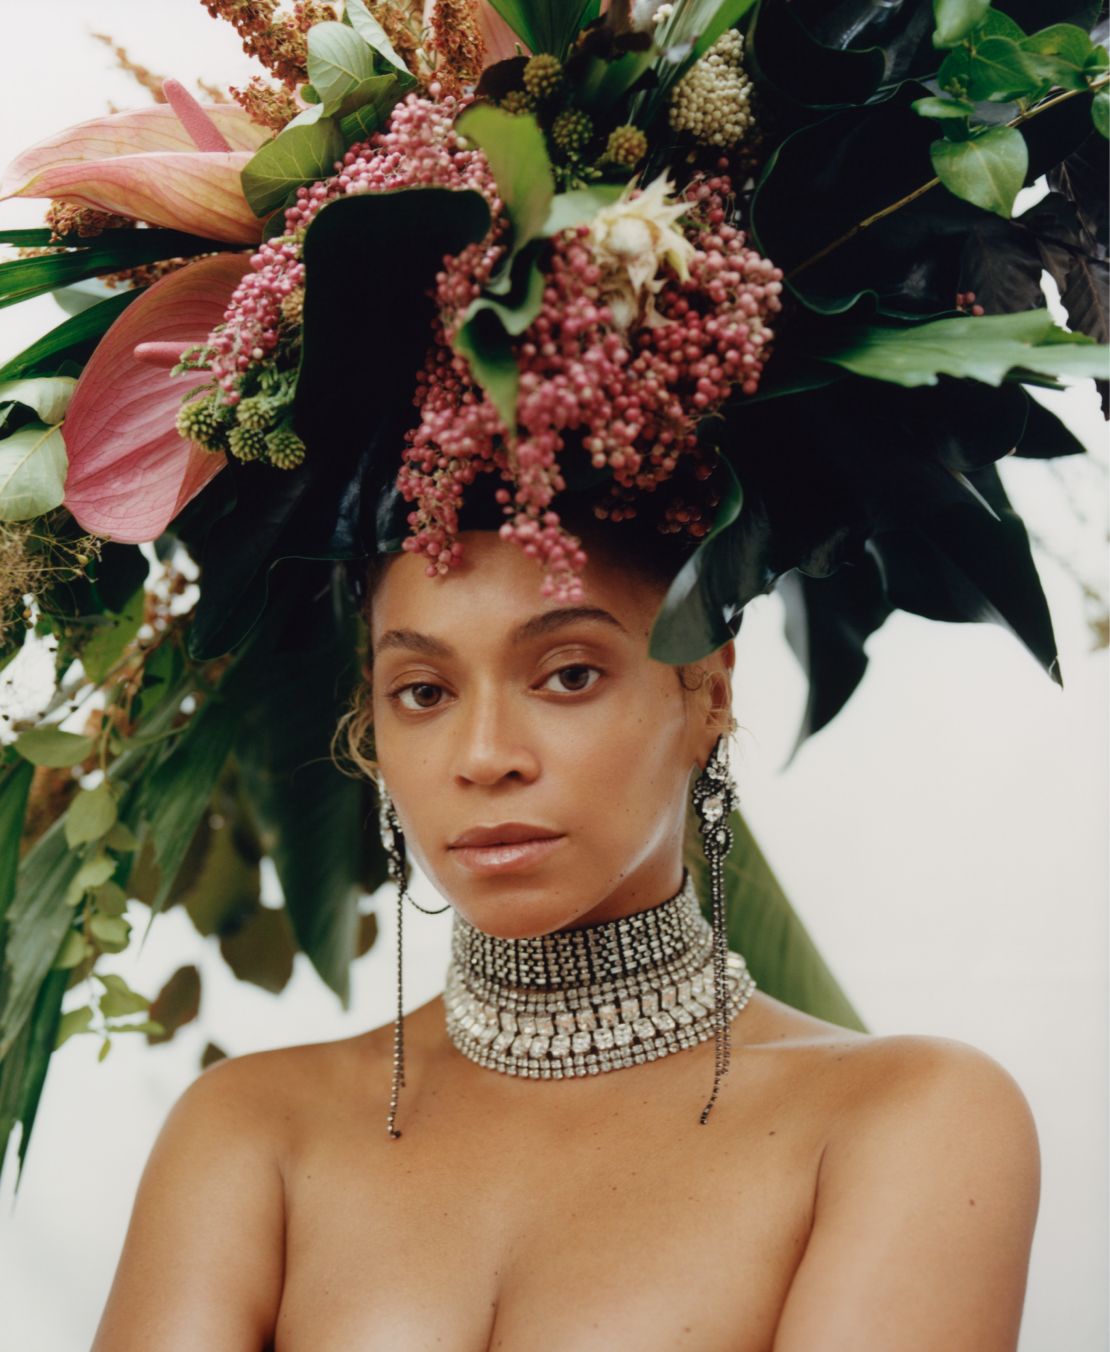 Beyoncé fourth cover for Vogue was shot by rising Black photographer Tyler Mitchell.